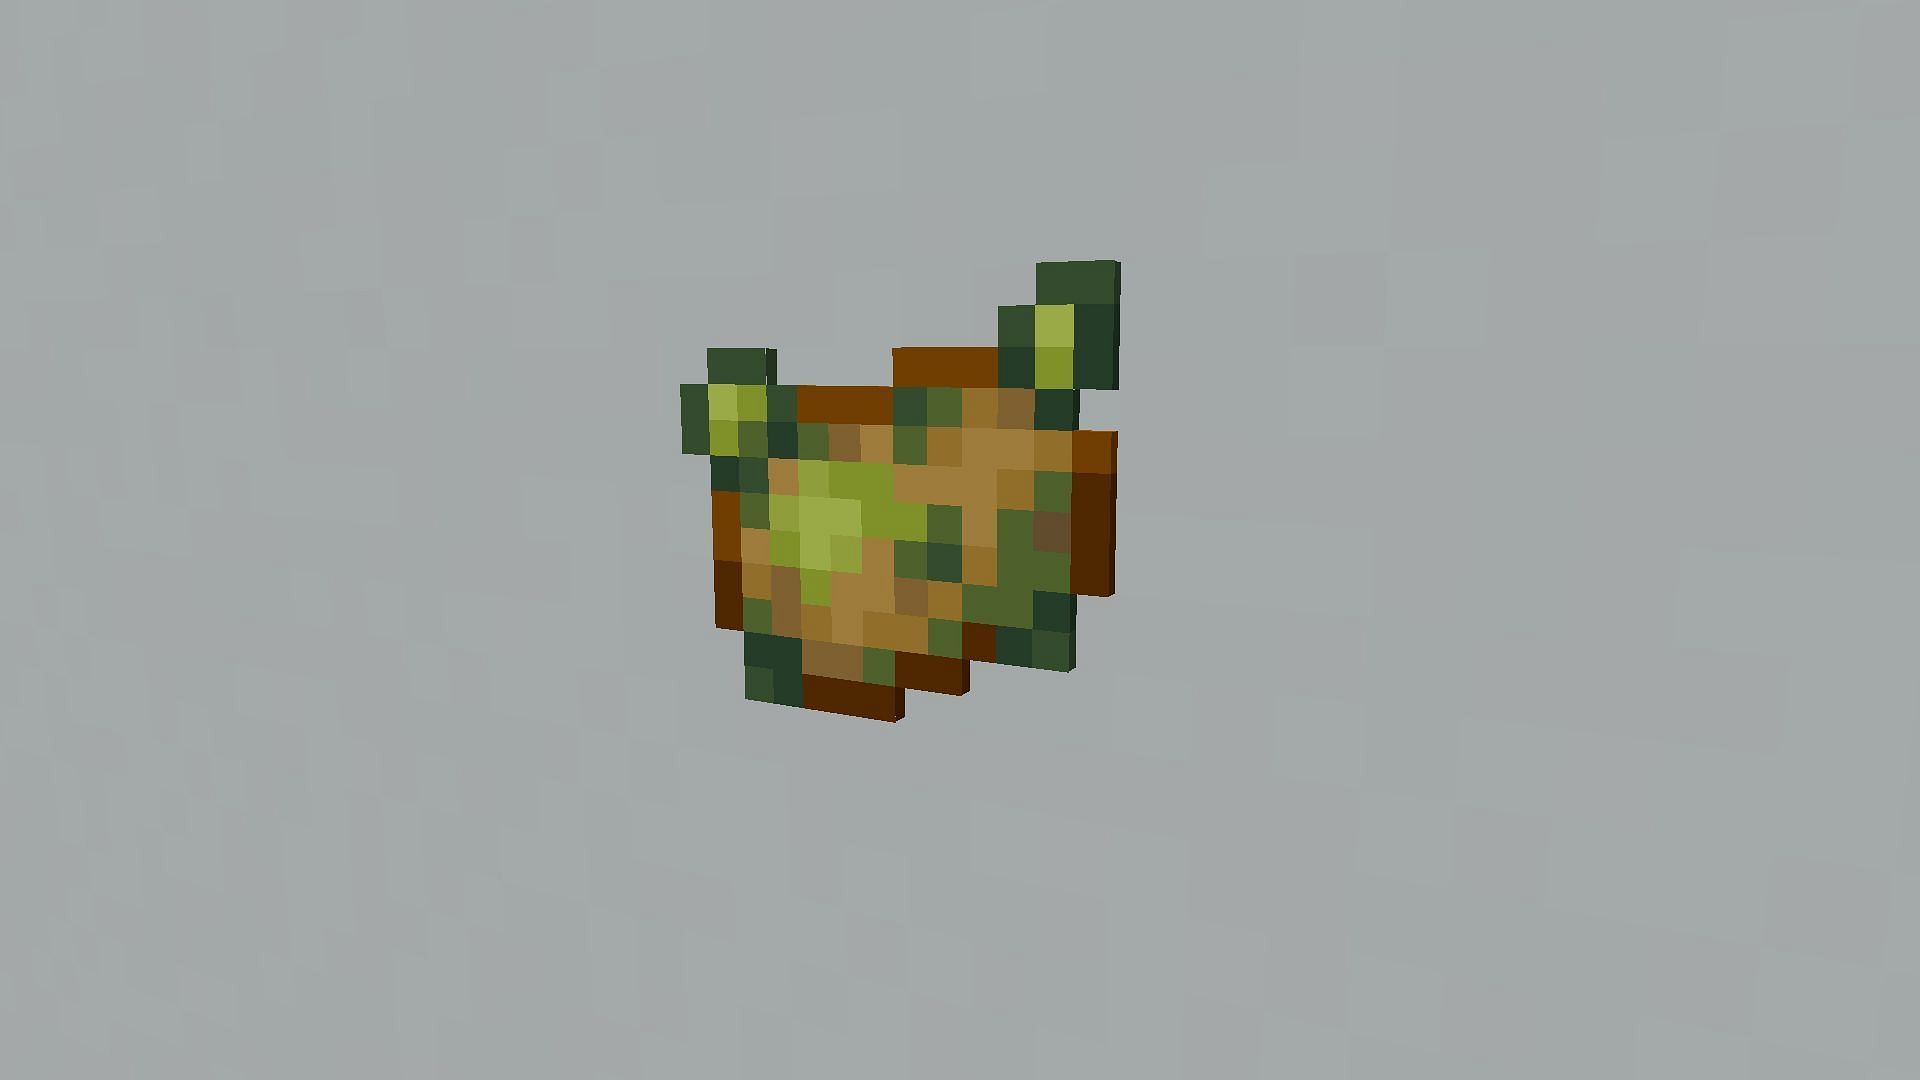 Poisonous Potato is one of the worst food items in Minecraft (Image via Mojang)